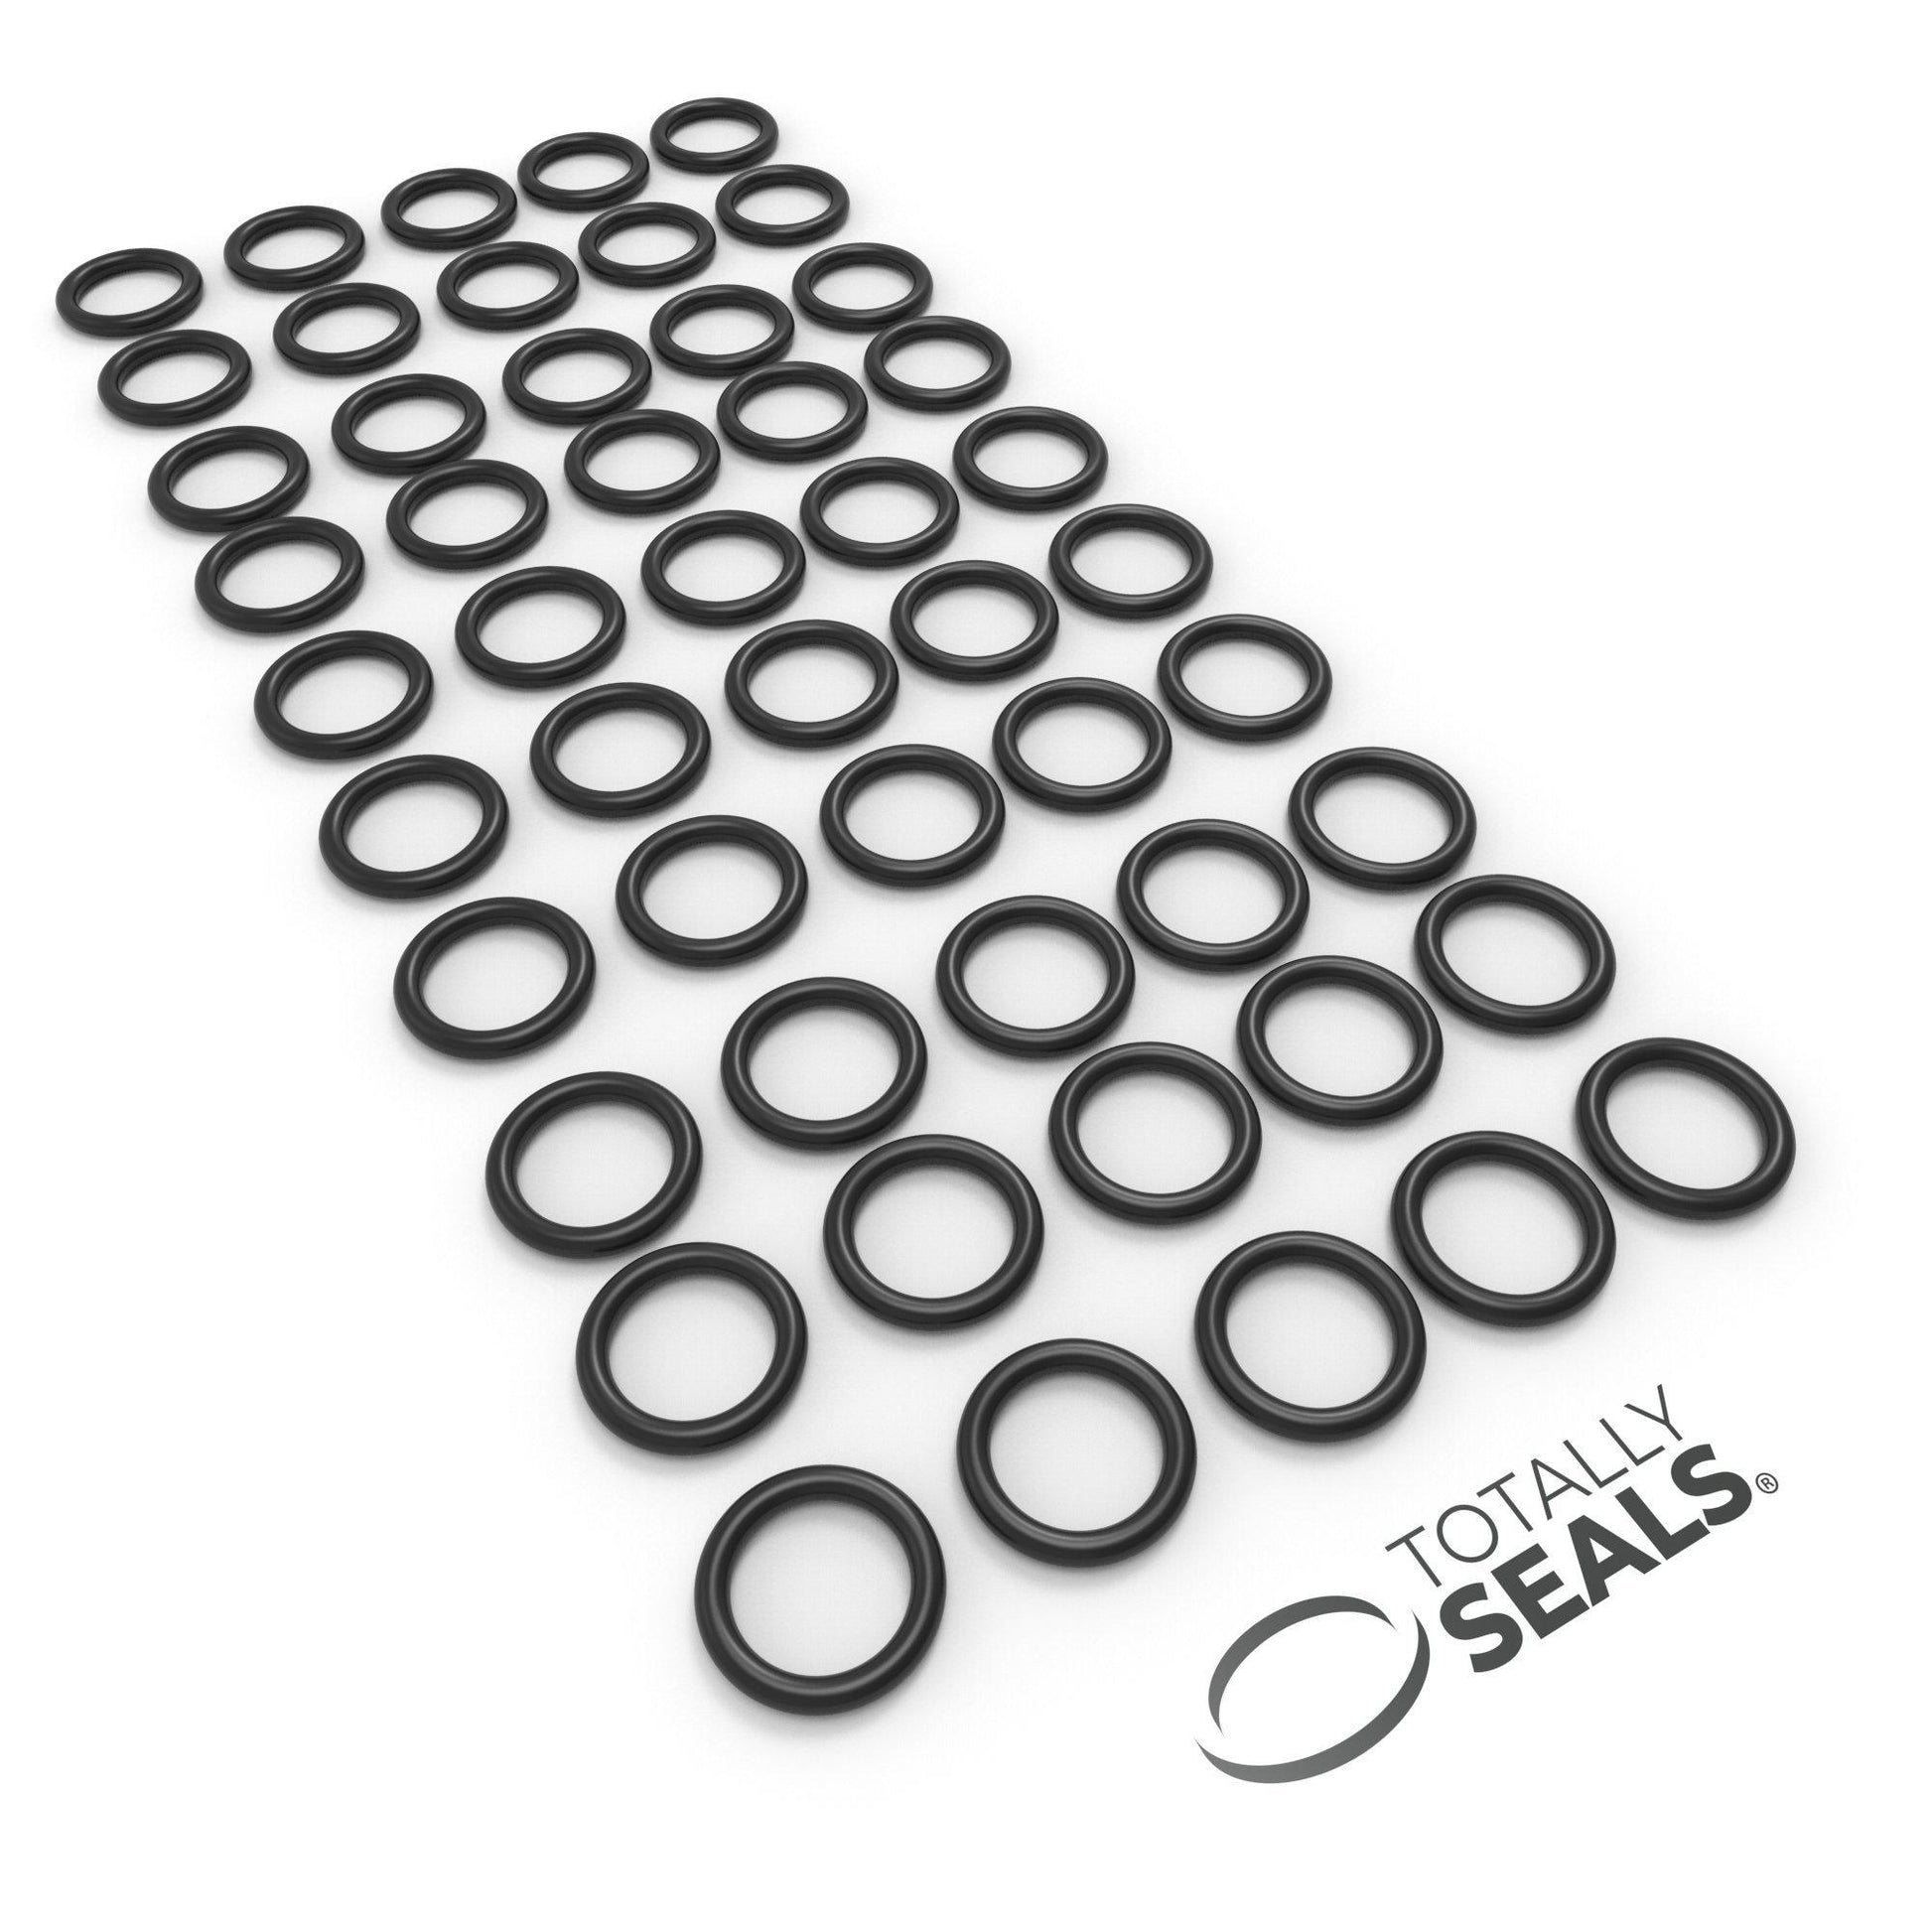 4mm x 1mm (6mm OD) Nitrile O-Rings - Totally Seals®